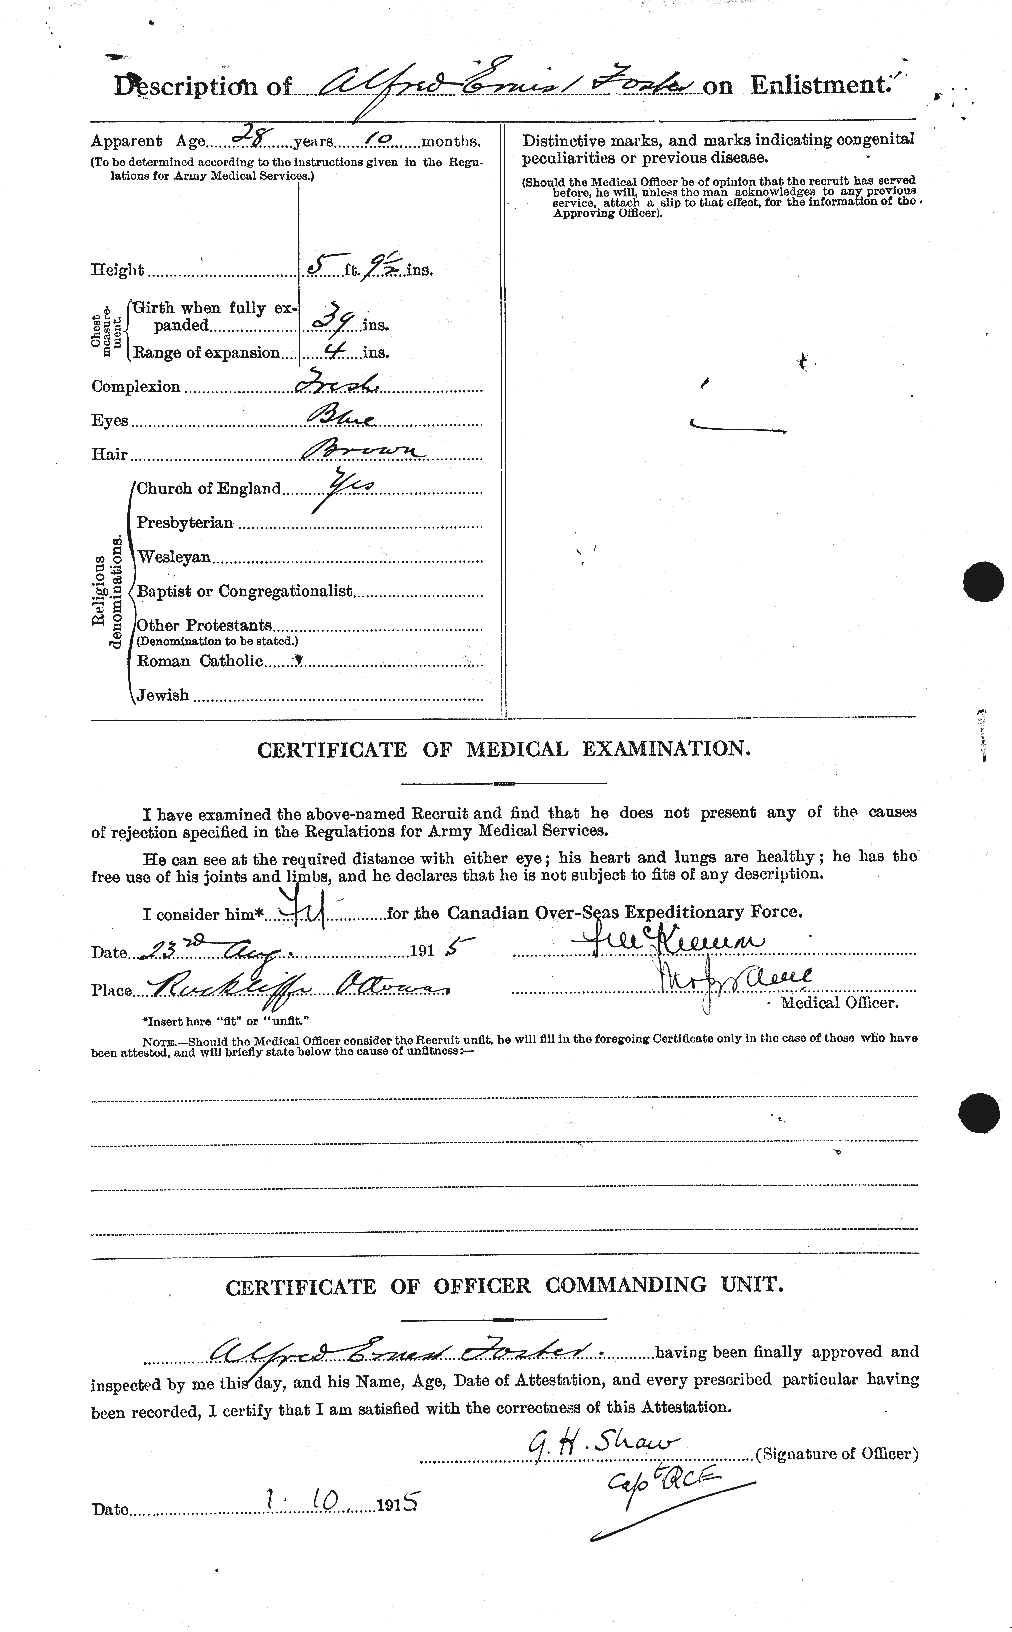 Personnel Records of the First World War - CEF 330447b